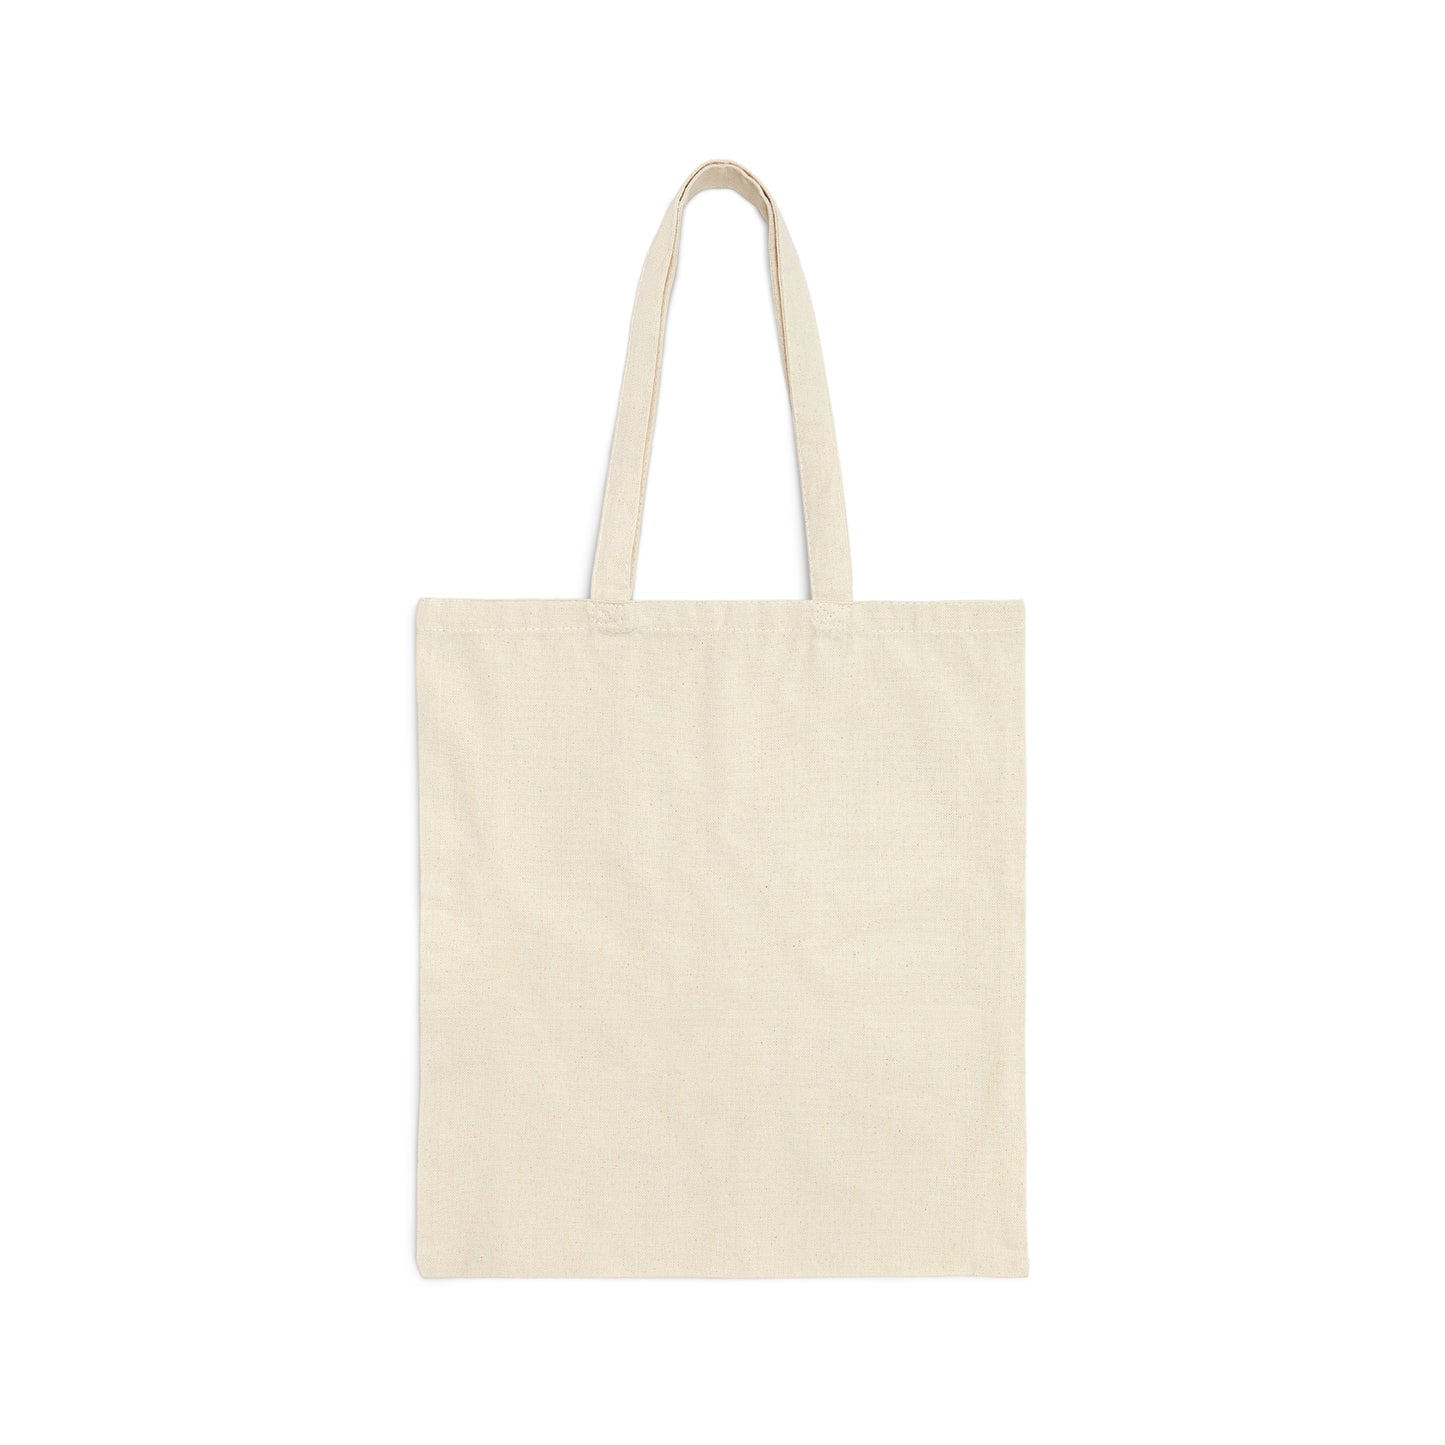 Merry Everything and a Happy Always - Christmas Tote Bag - Cotton Canvas Tote Bag